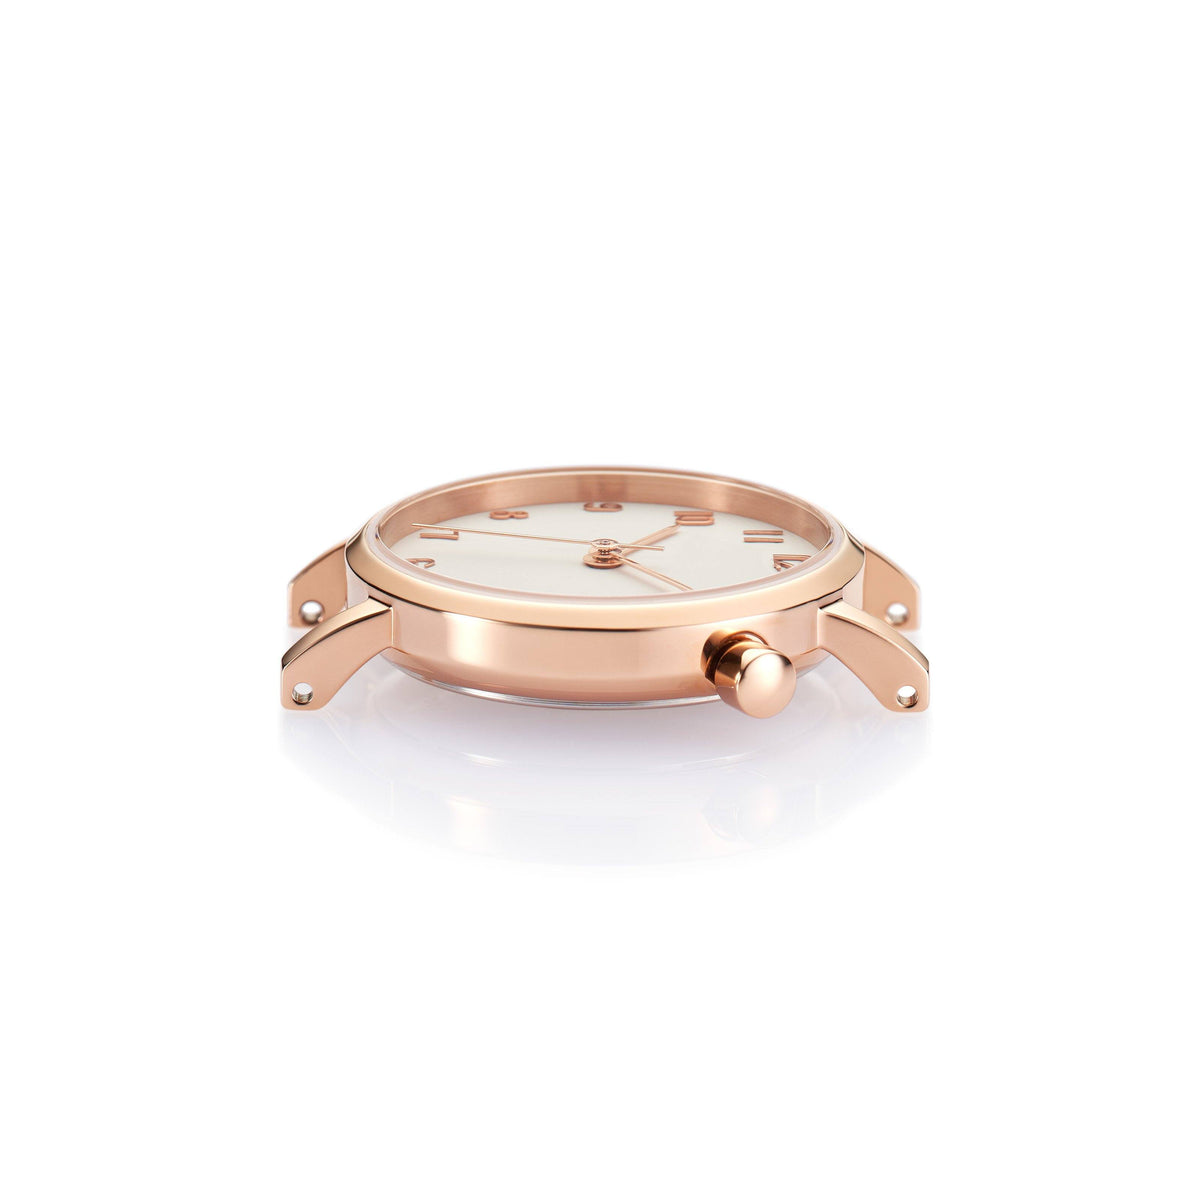 The White and Rose Gold Watch - Midnight (Kids)